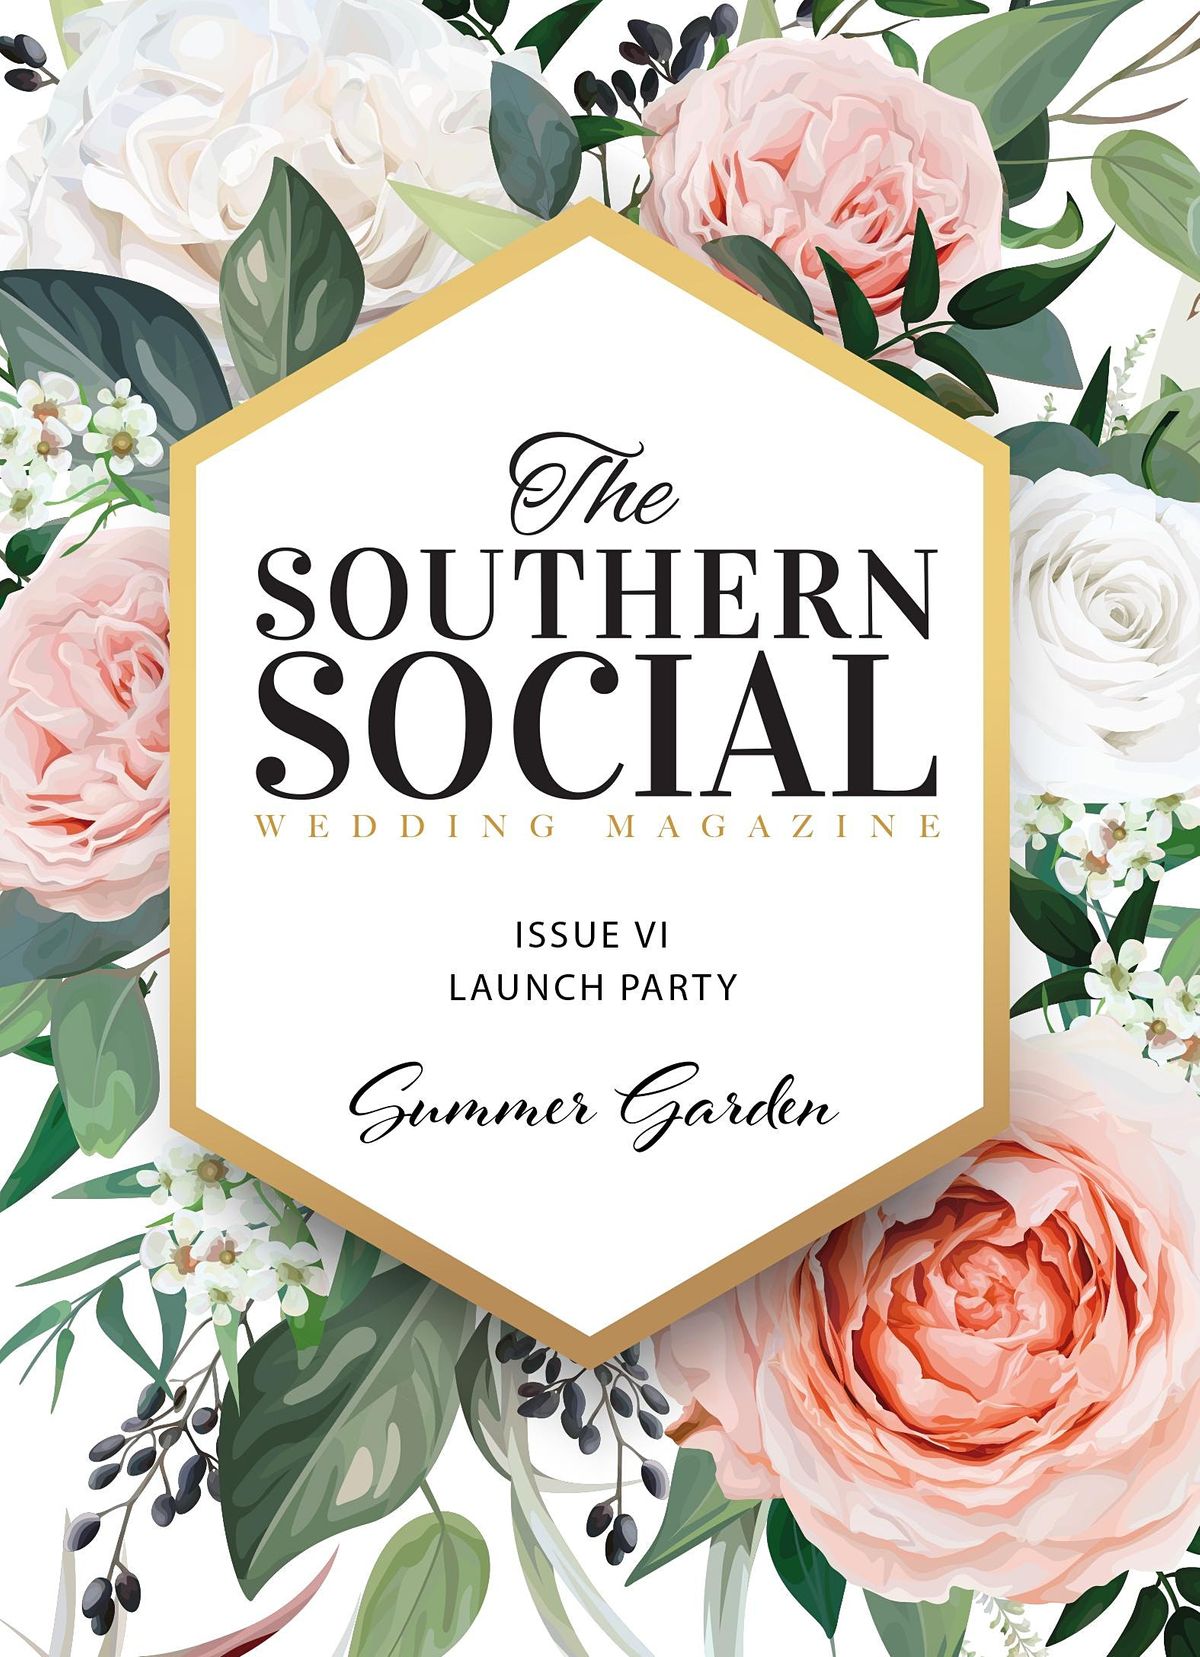 The Southern Social Issue 6 Launch party